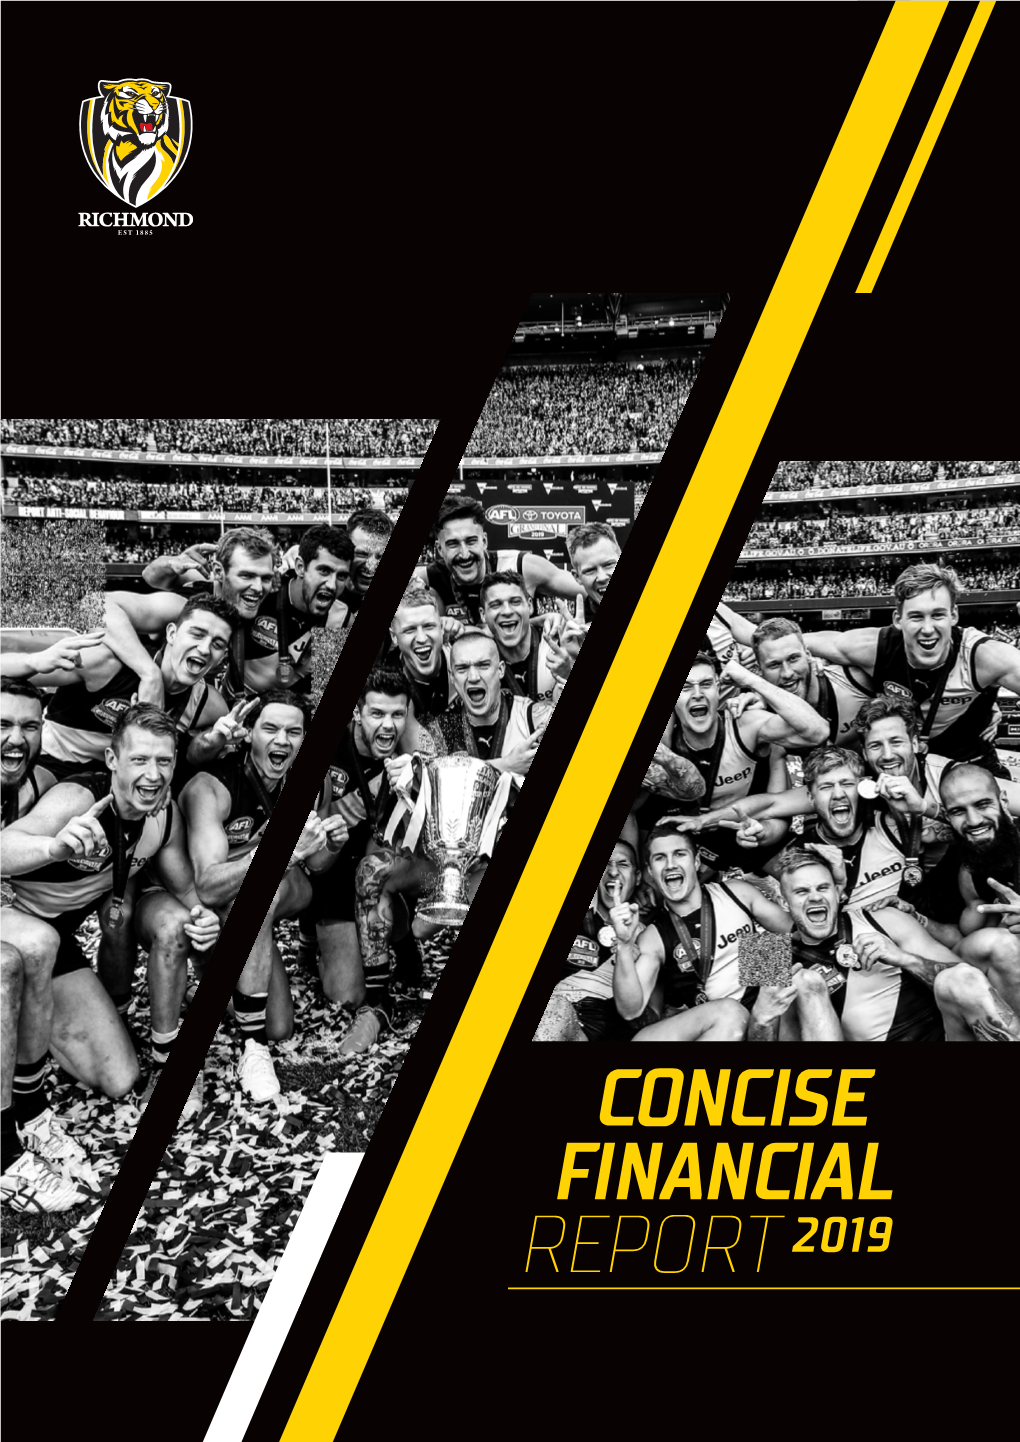 Concise Financial Report 2019